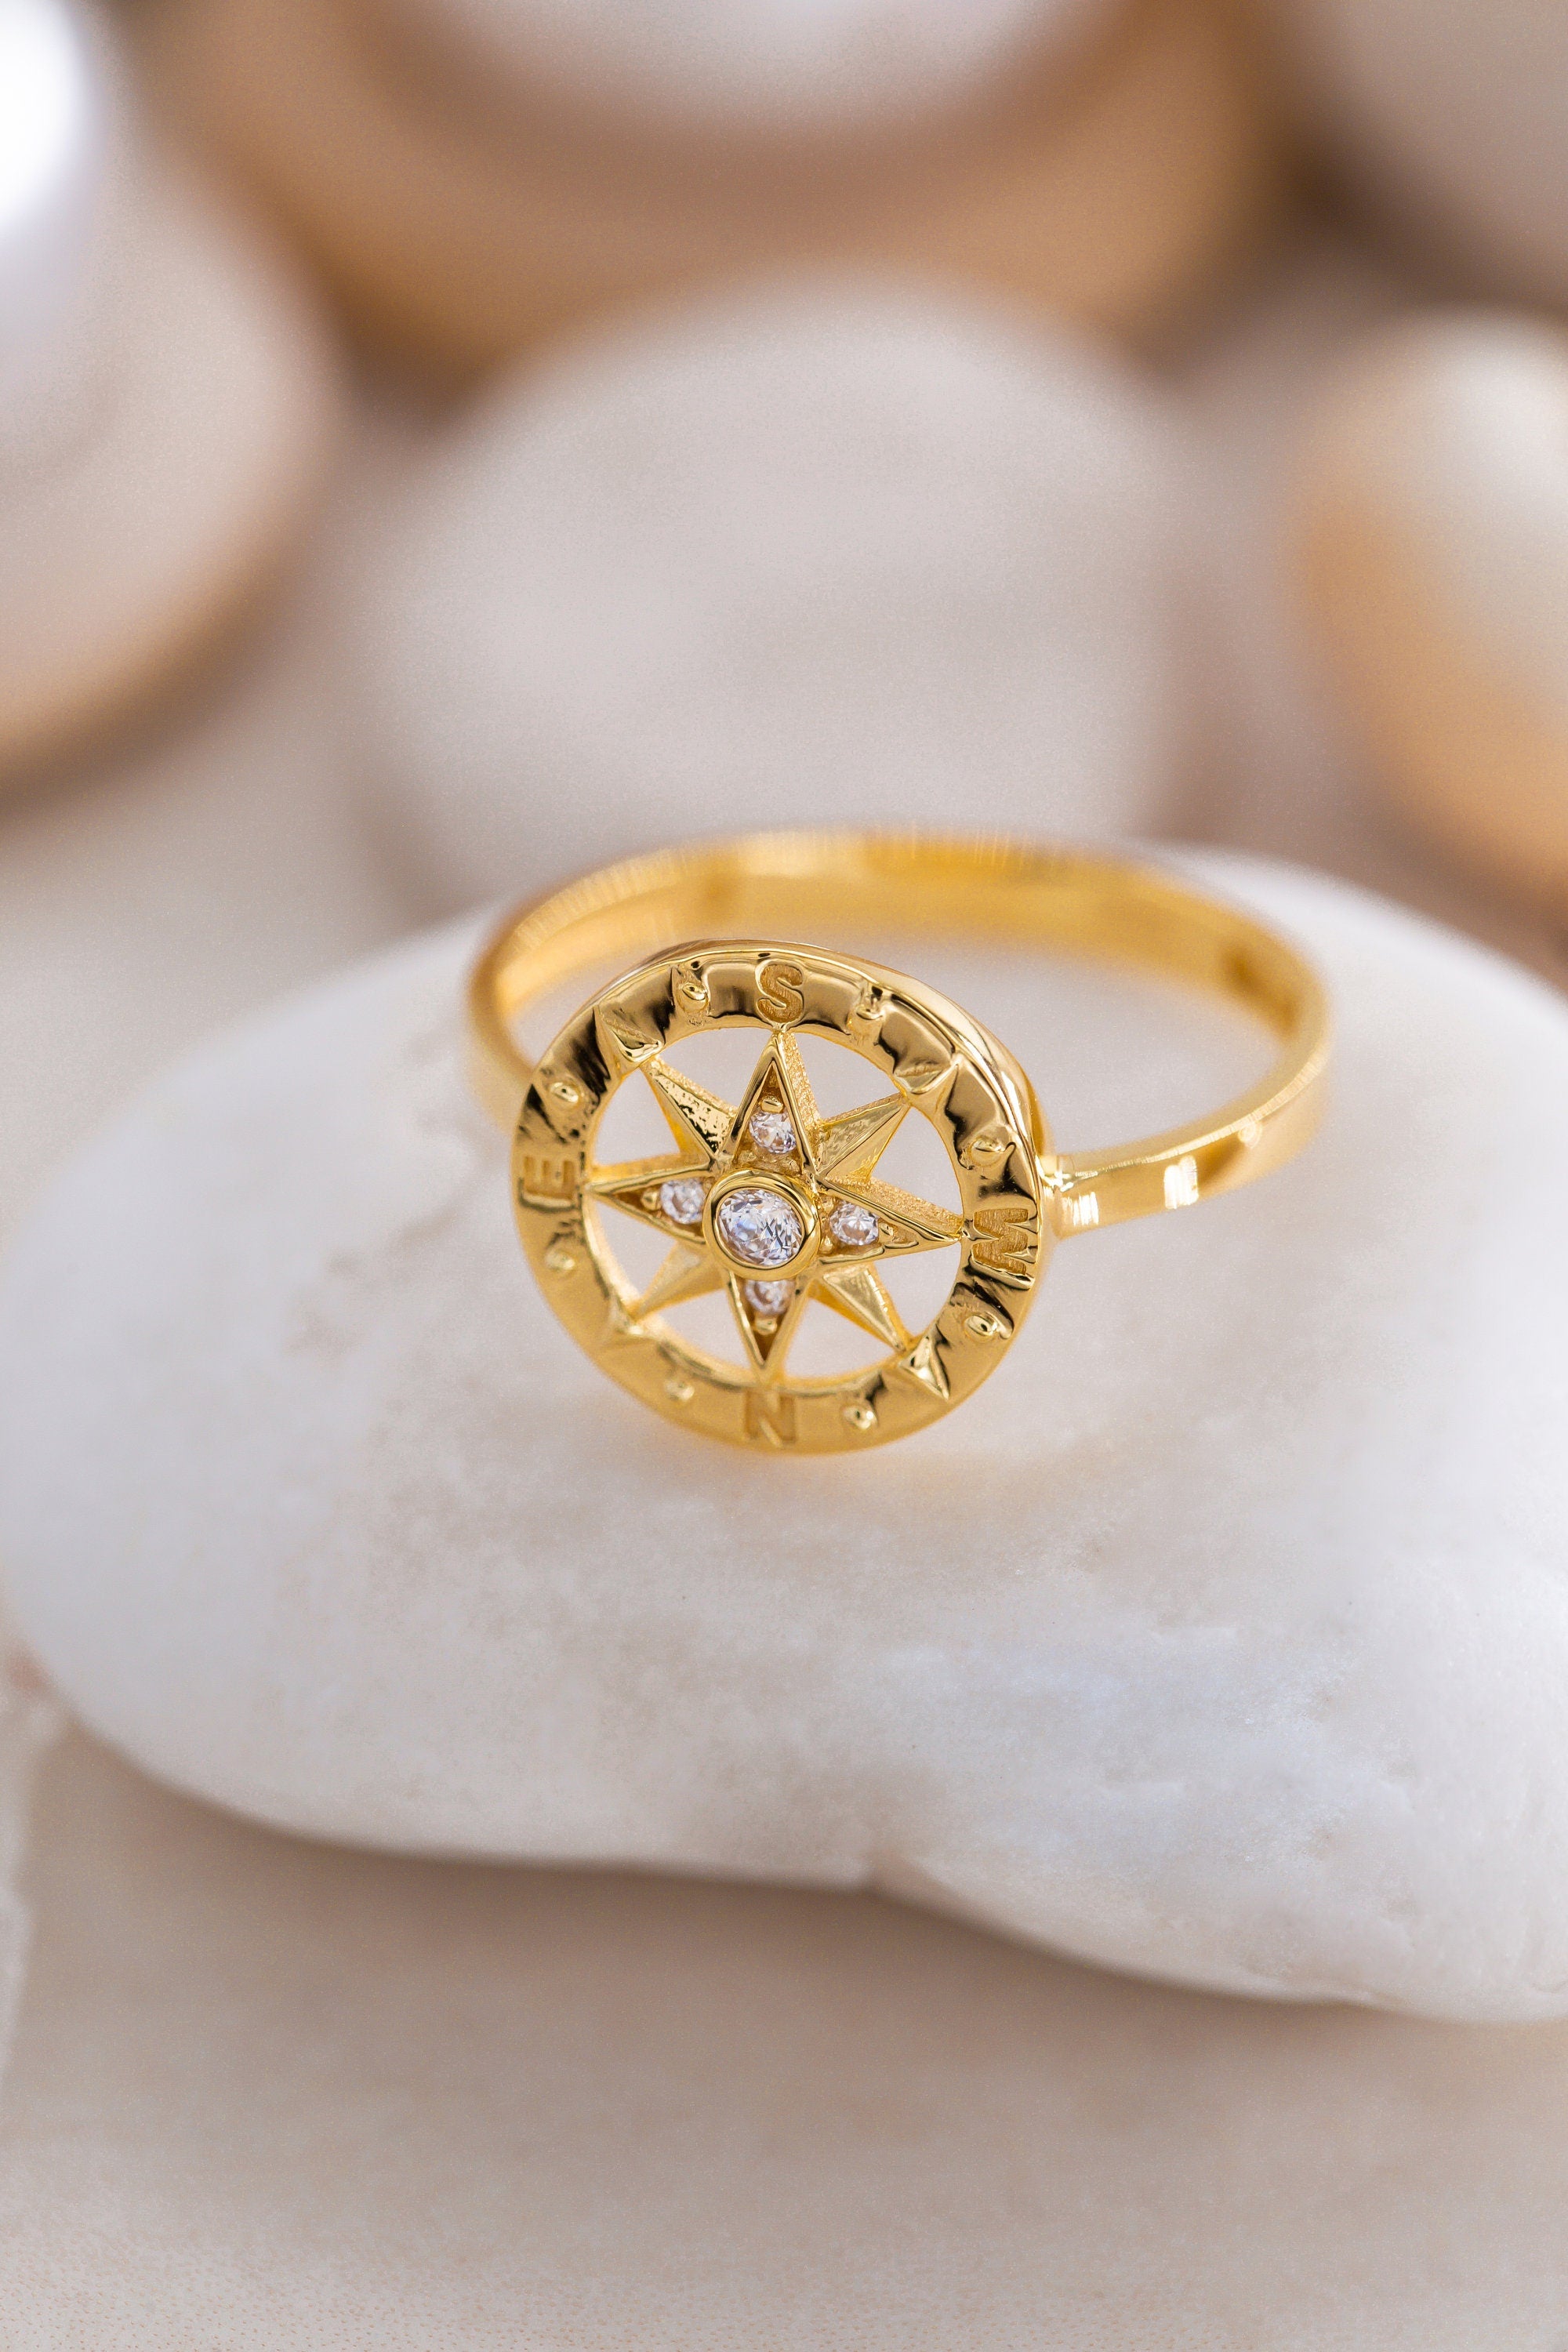 14K Gold Celestial Motif, 925 Sterling Silver Ring, Minimalist Starburst Design, Astronomy-Inspired Band, Cosmic Starry Jewelry Piece